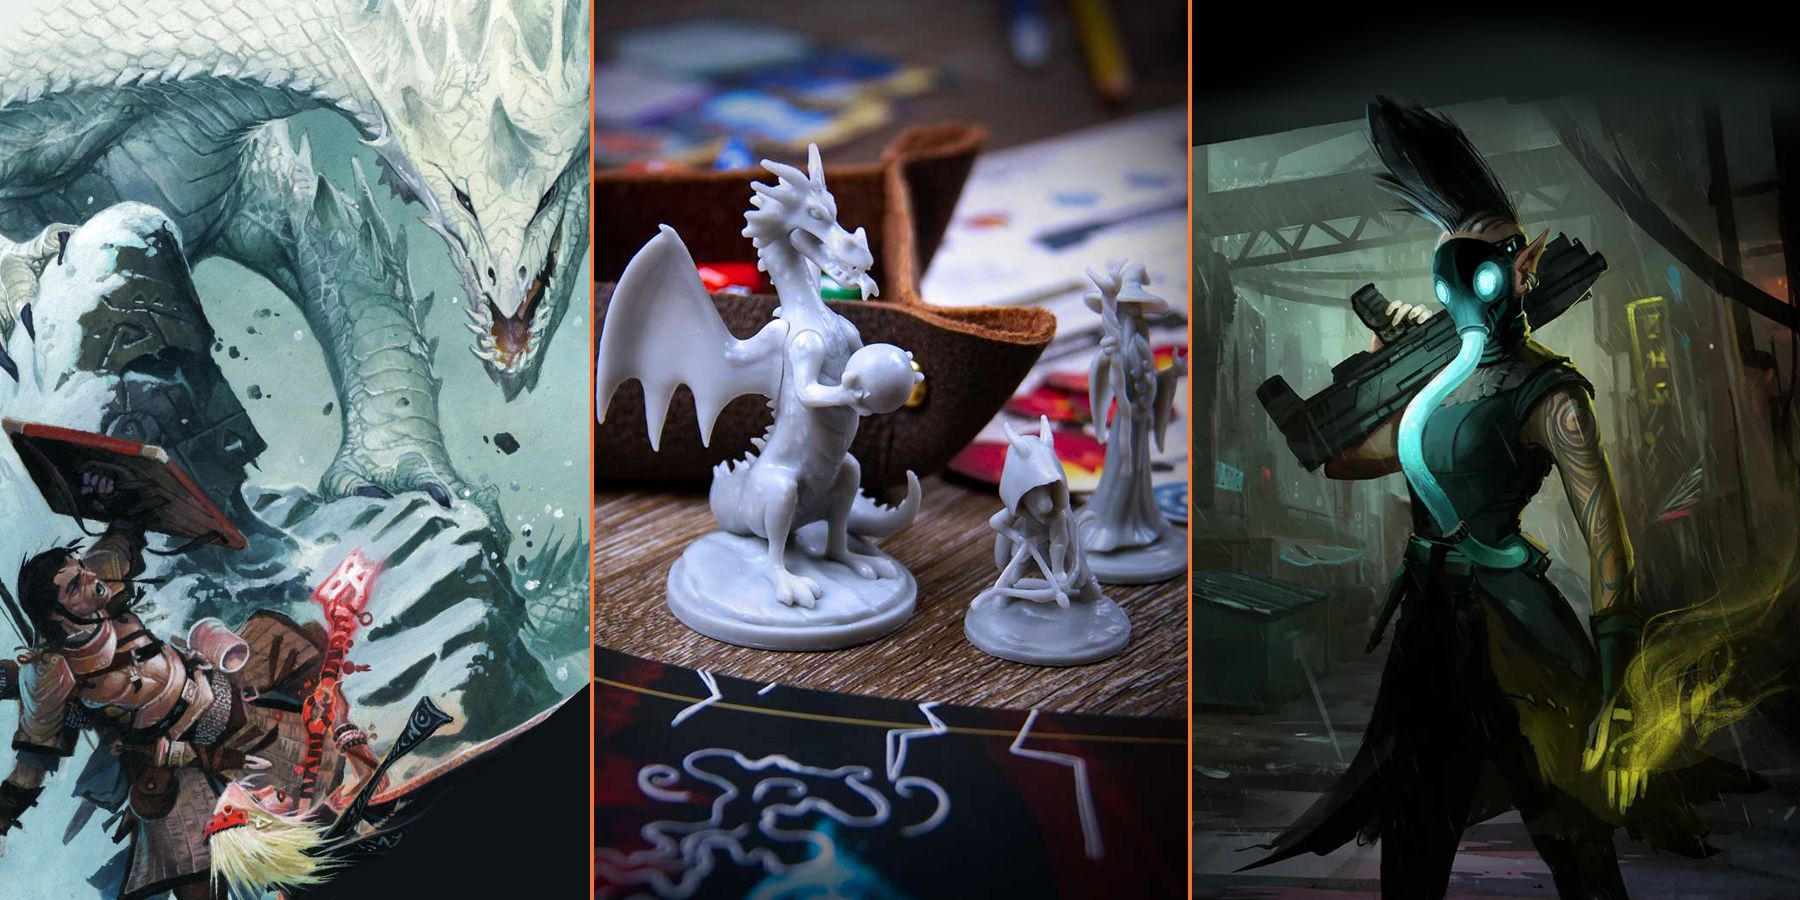 15-Tabletop-Games-To-Play-If-You-Like-Dungeons-Dragons_FI-01-1